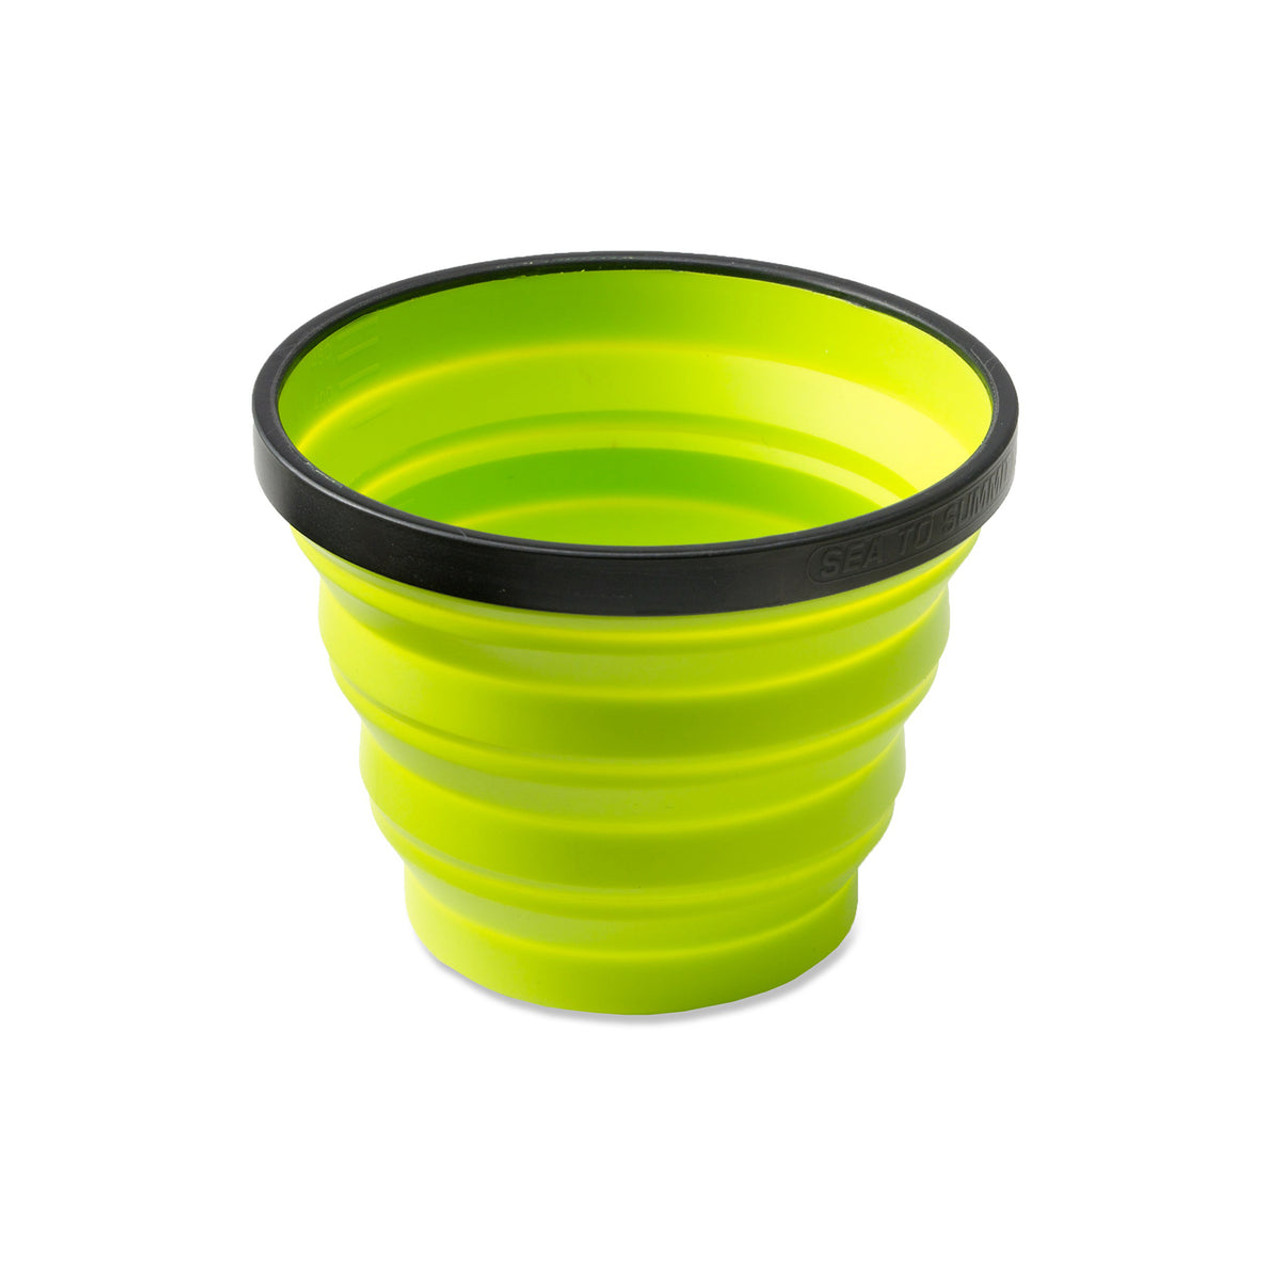 Sea to Summit Collapsible X-Cup